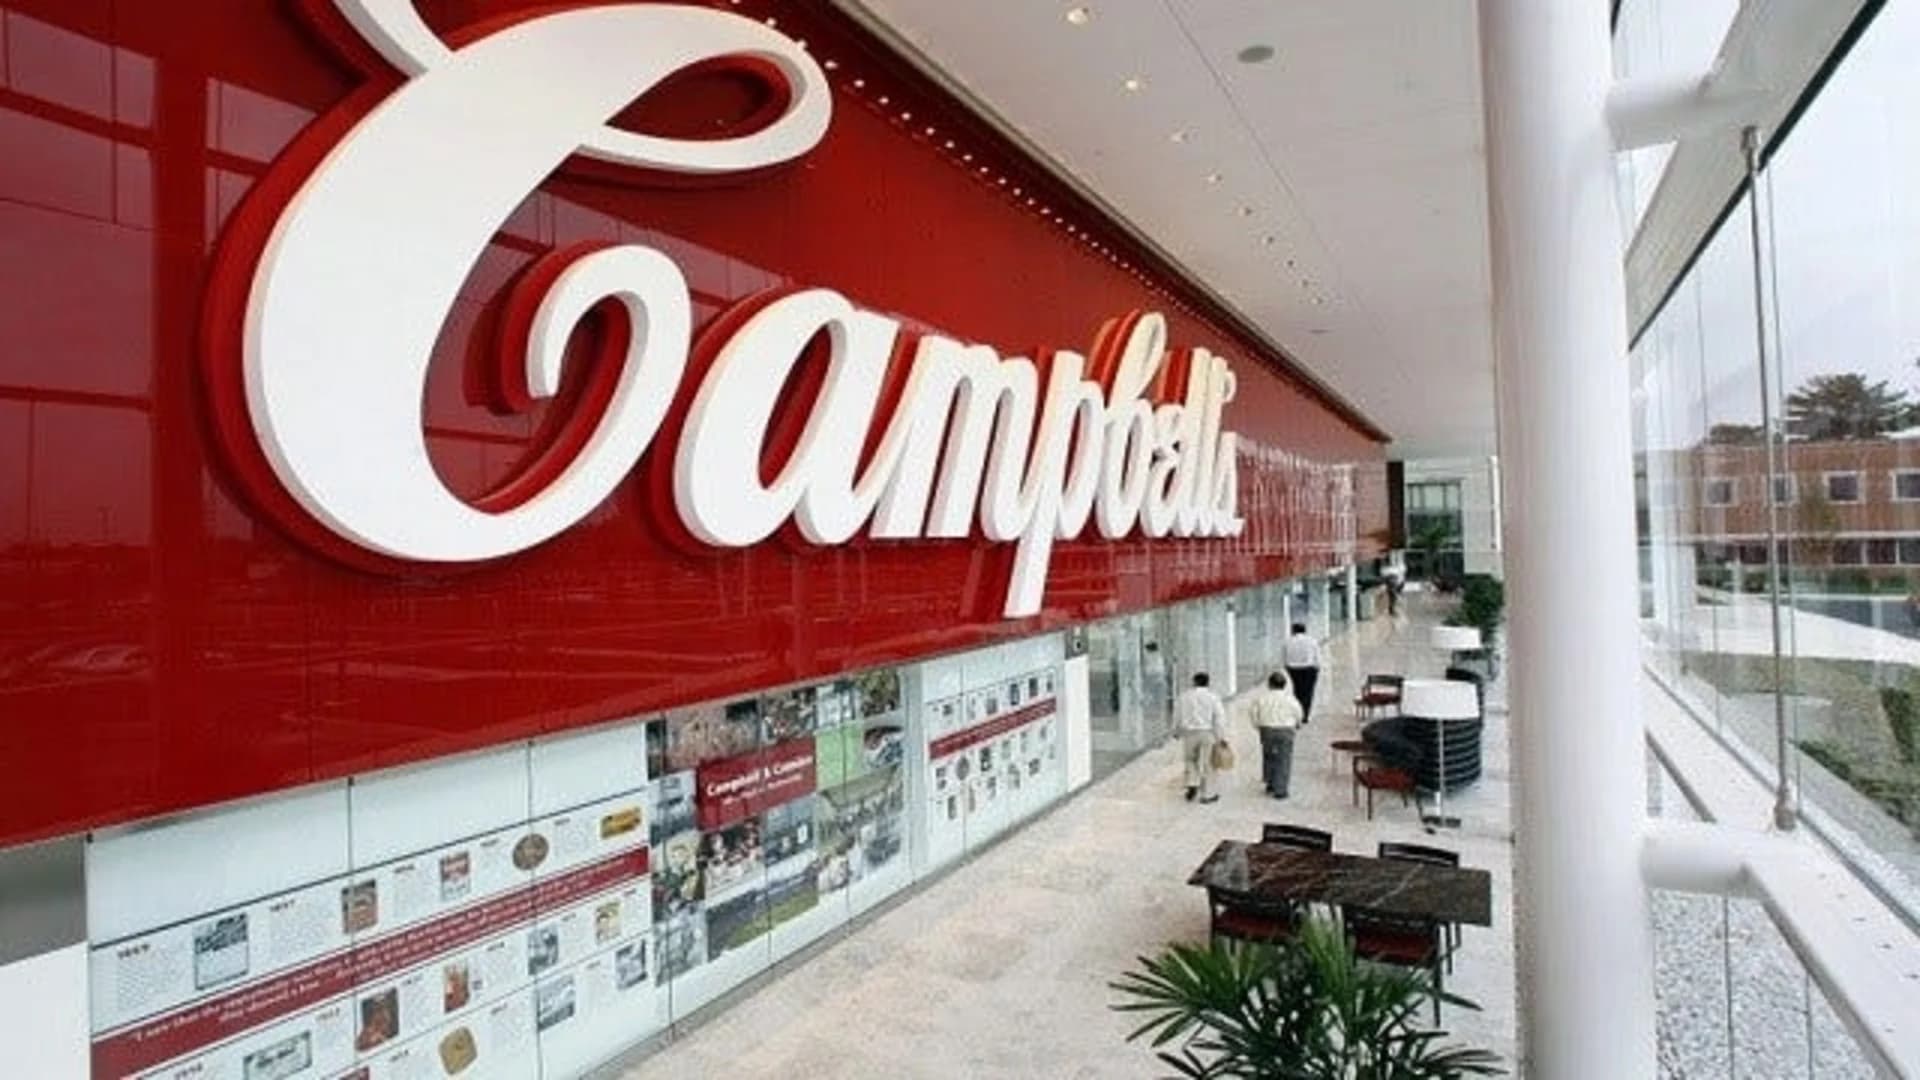 New Jersey-based Campbell buys Snyder's-Lance for $4.87B